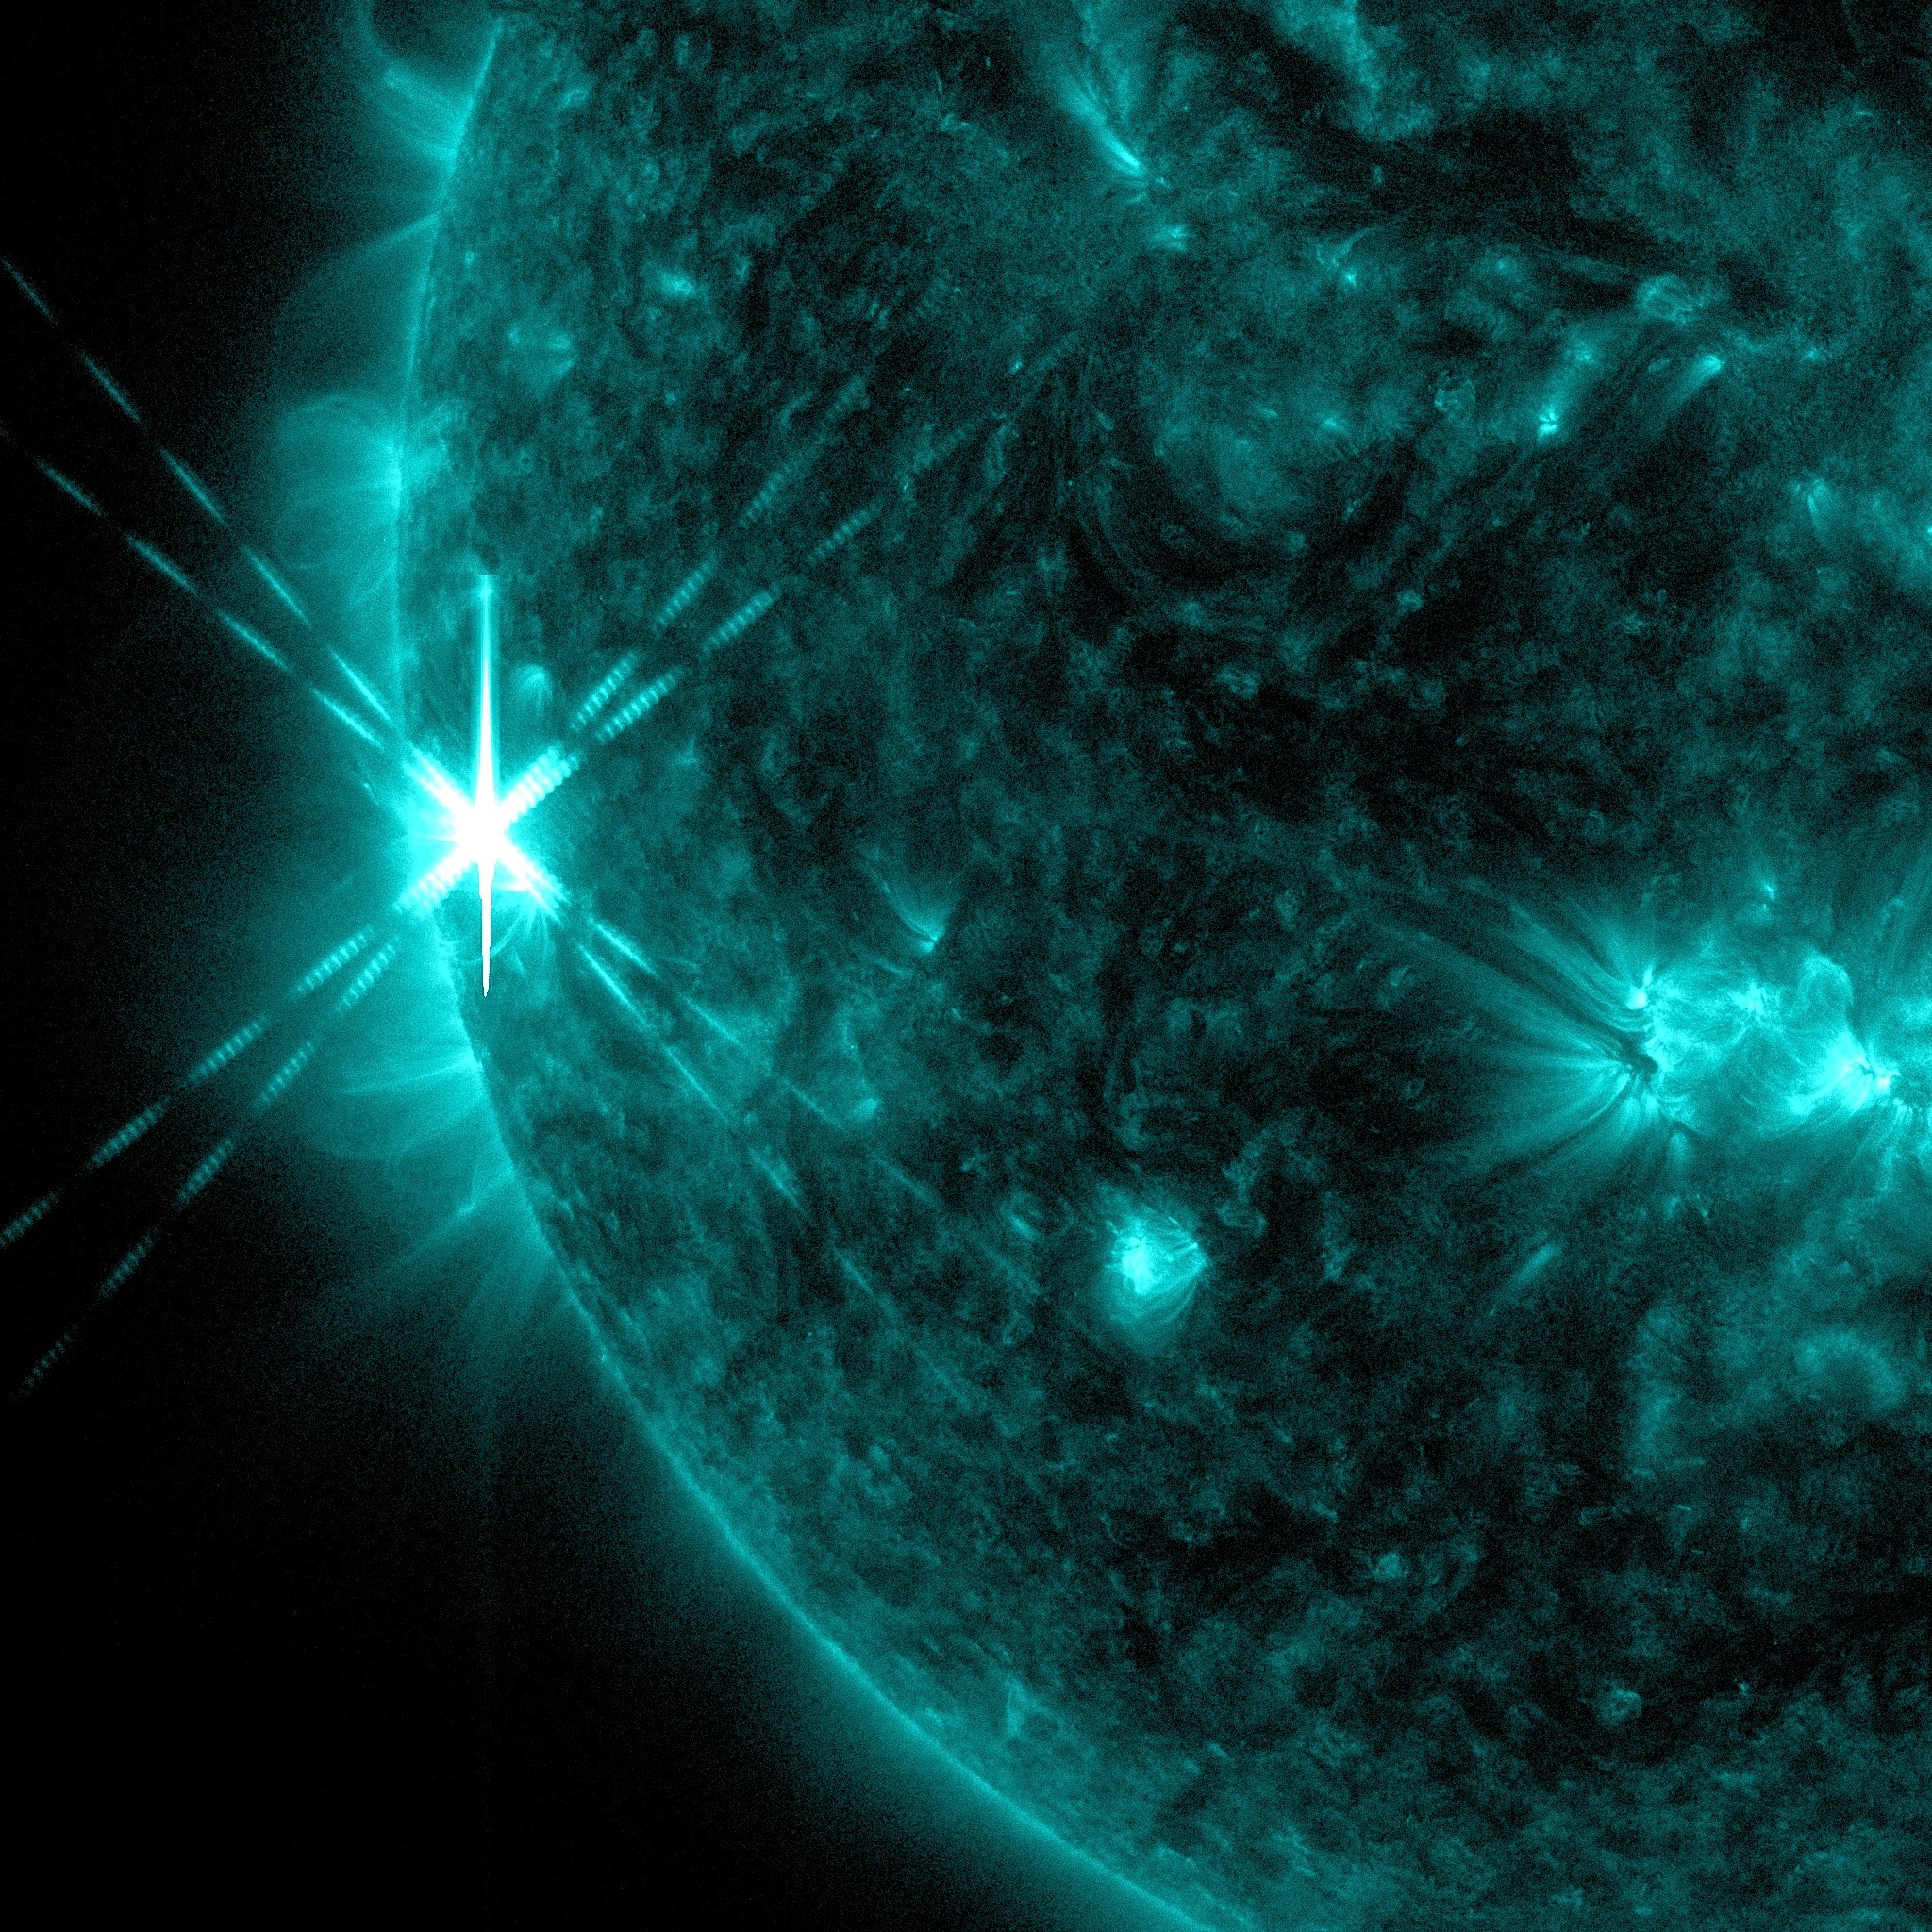 X1.7 flare from 4:01am EDT Oct 25 2013, viewed in SDO AIA 131.  Cropped.